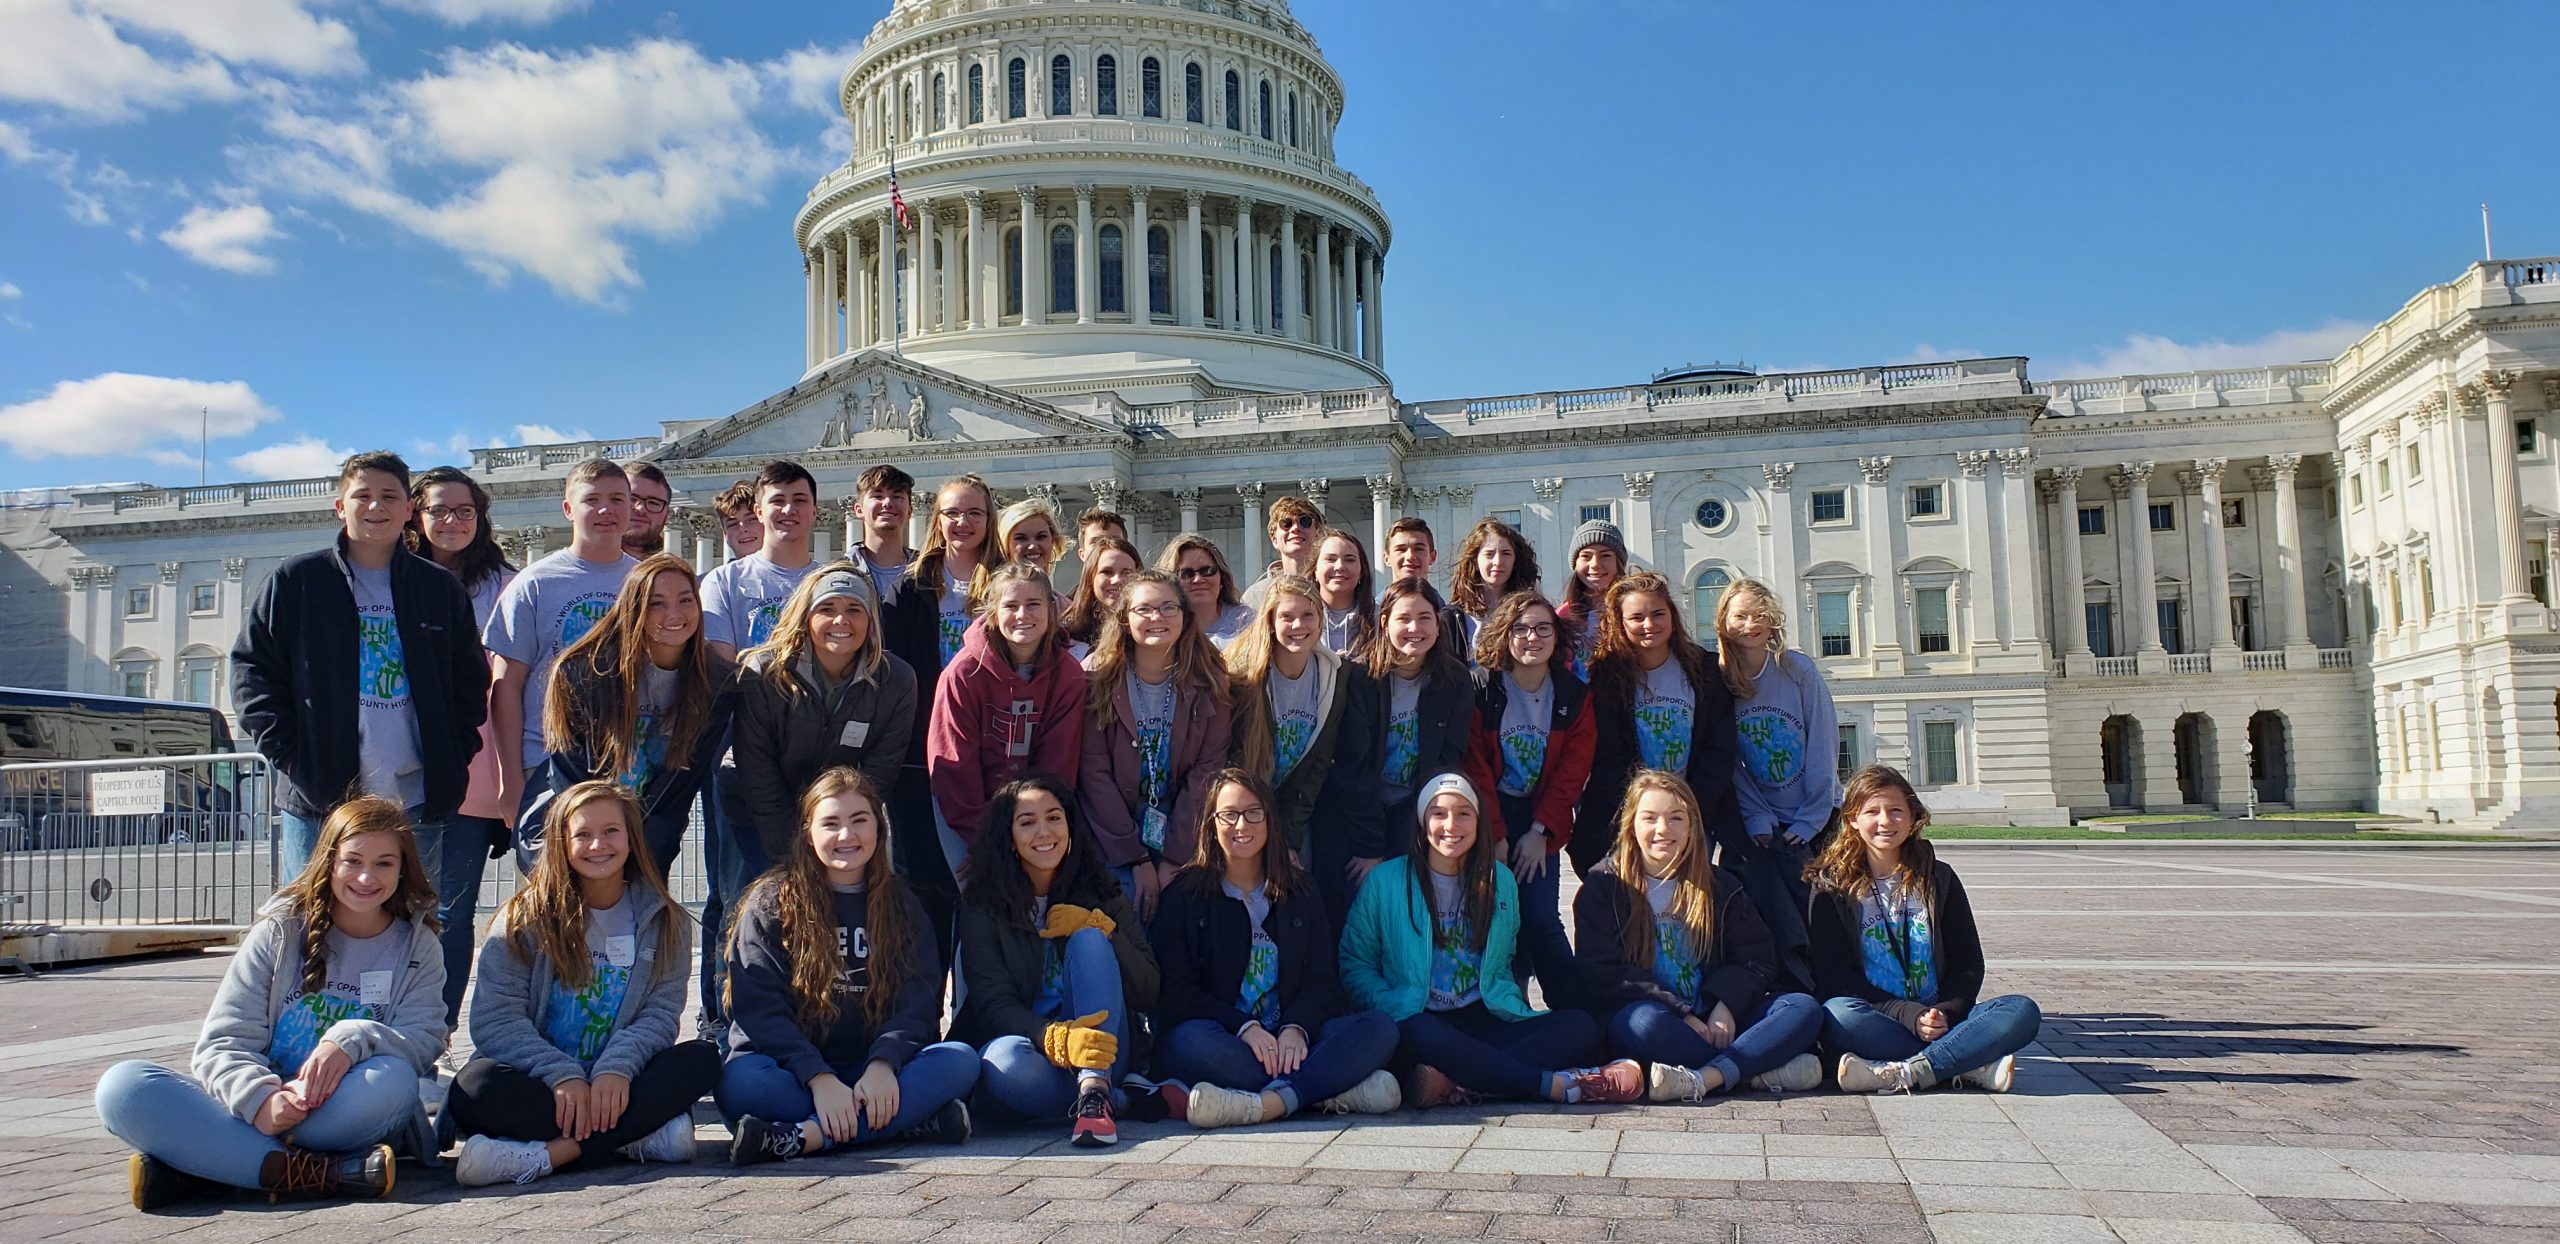 Vol. 35: Musings of Student Returning From D.C. Class Trip